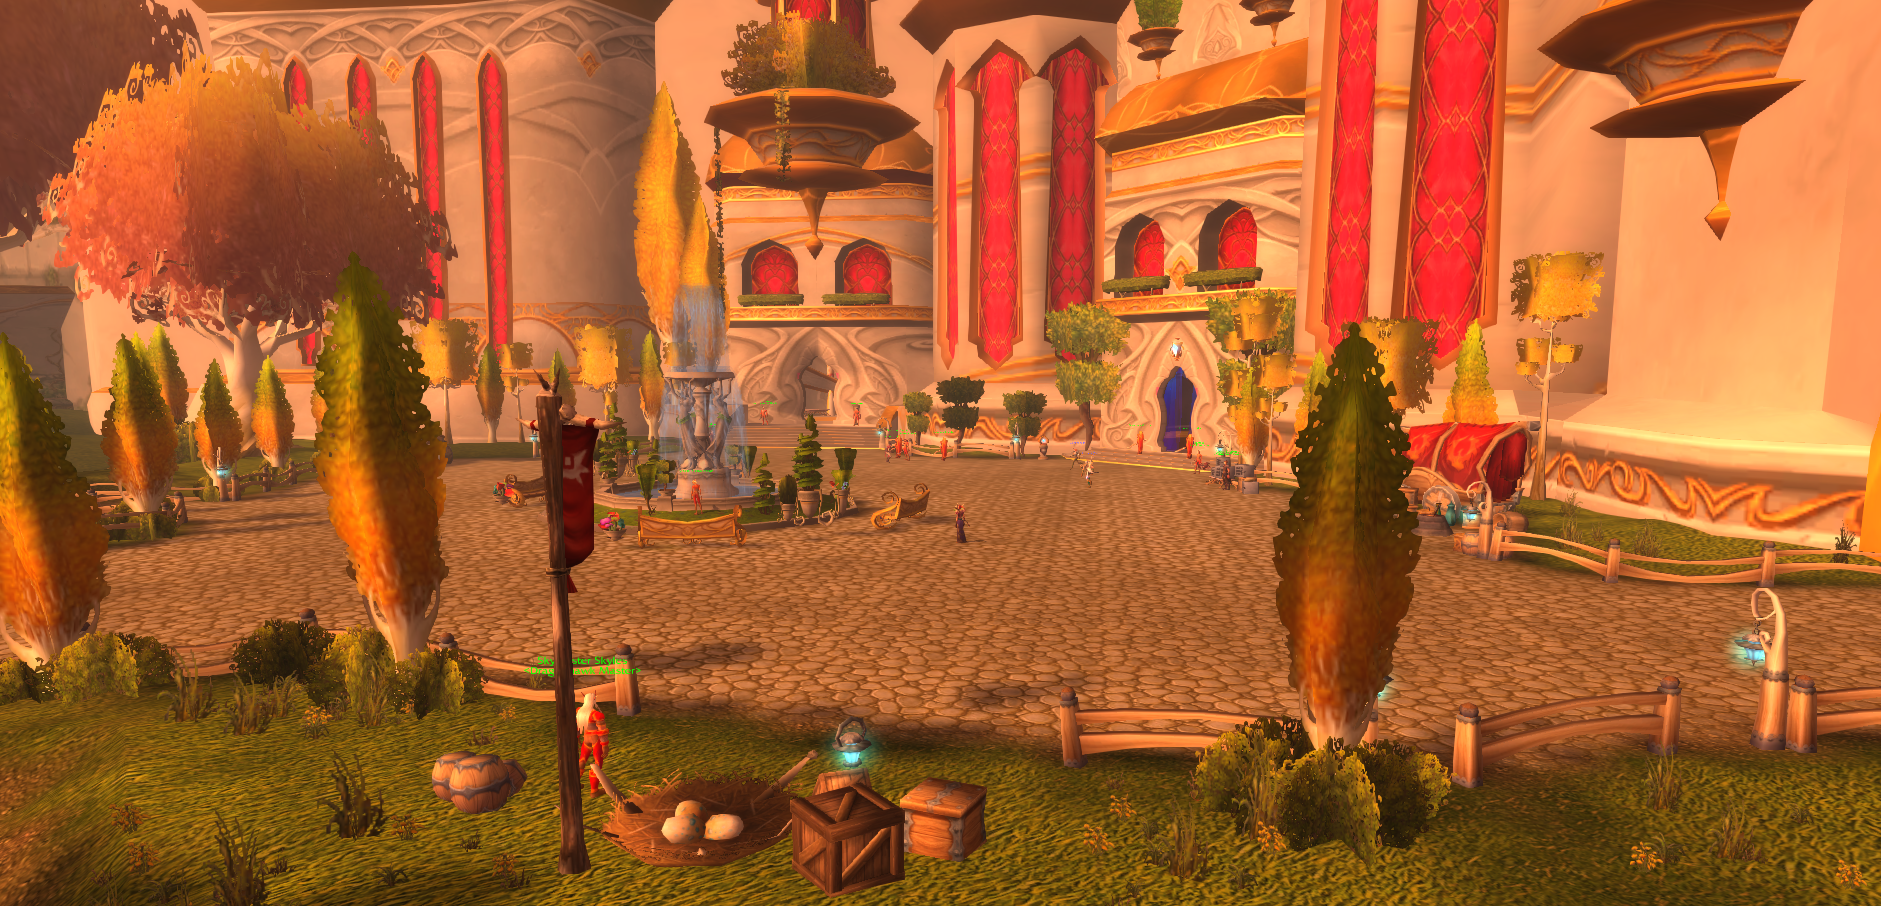 This is outside the entrance of Silvermoon, which is the Horde home of the Blood Elf.